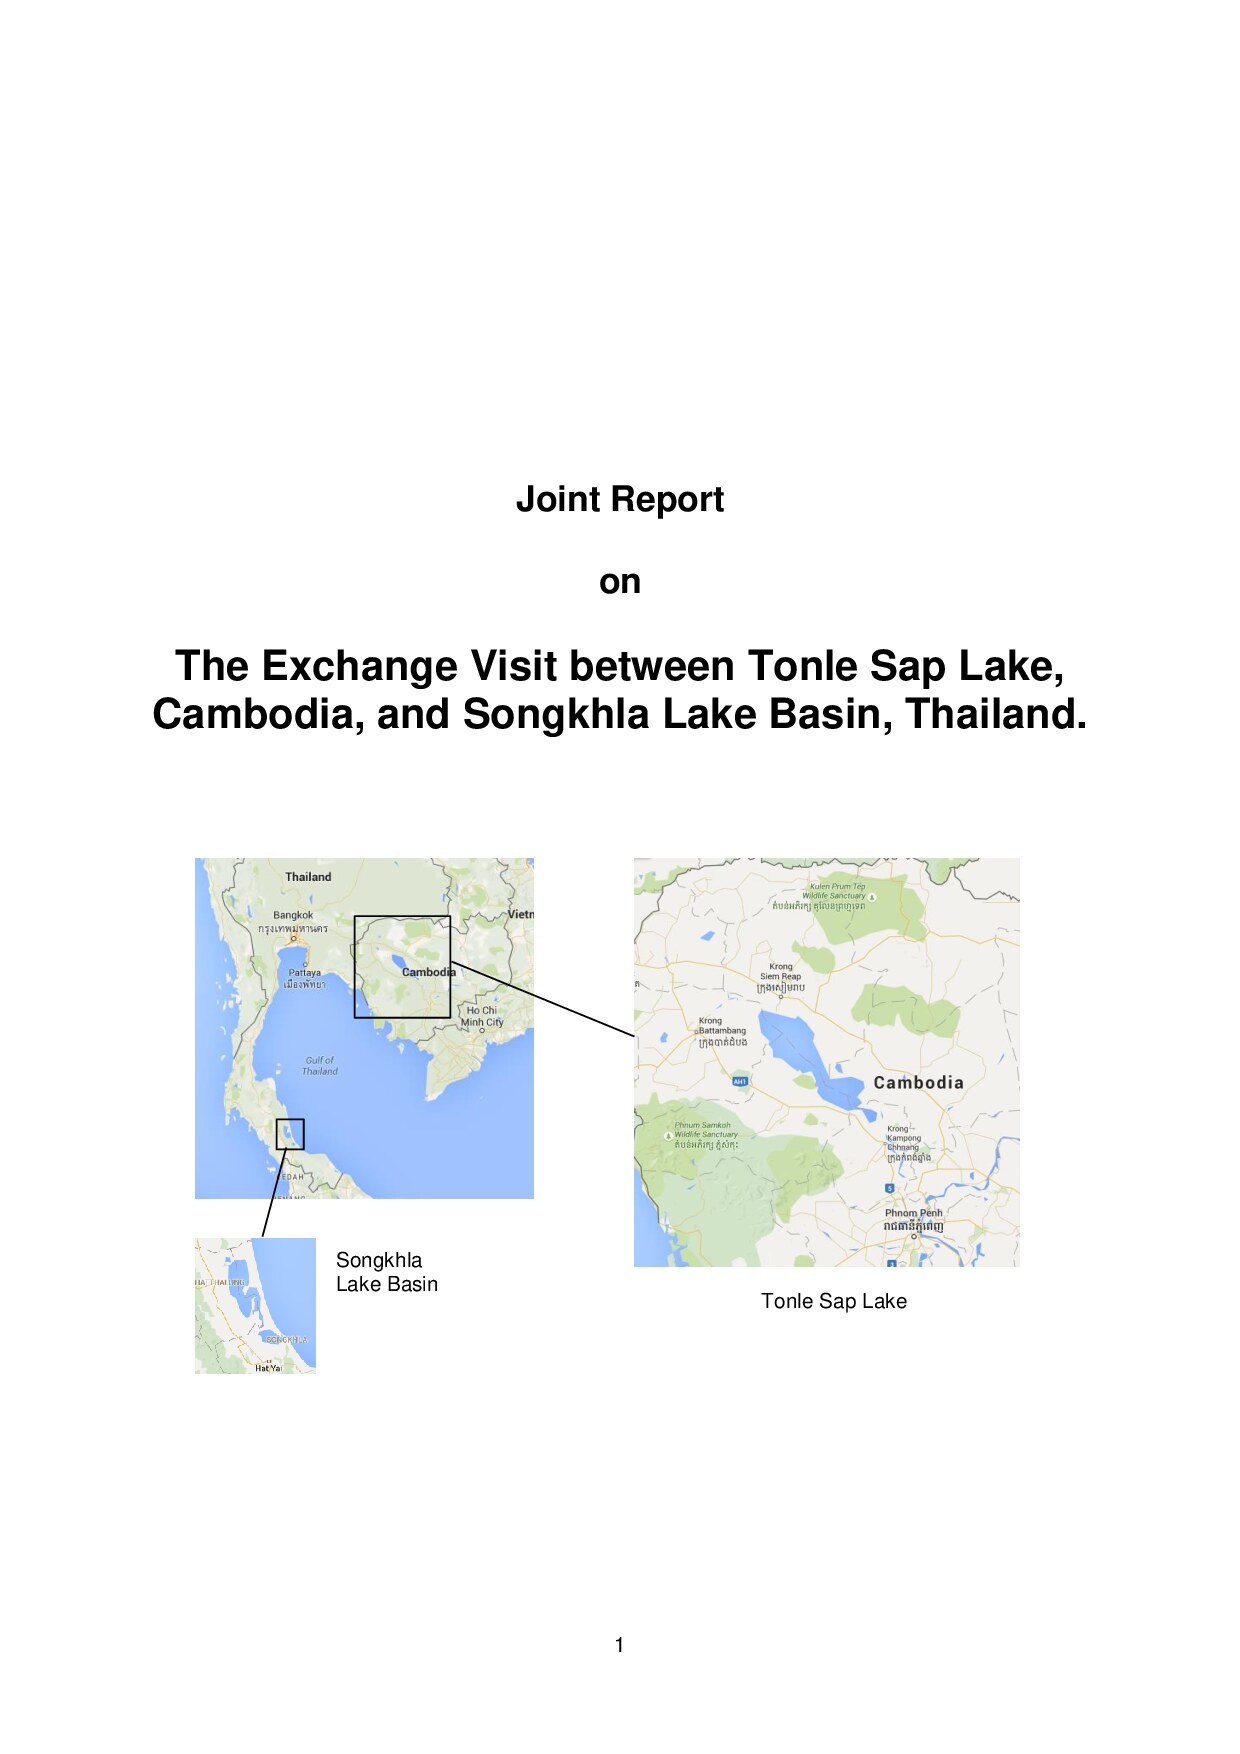 Joint Report on The Exchange Visit between Tonle Sap Lake, Cambodia, and Songkhla Lake Basin, Thailand